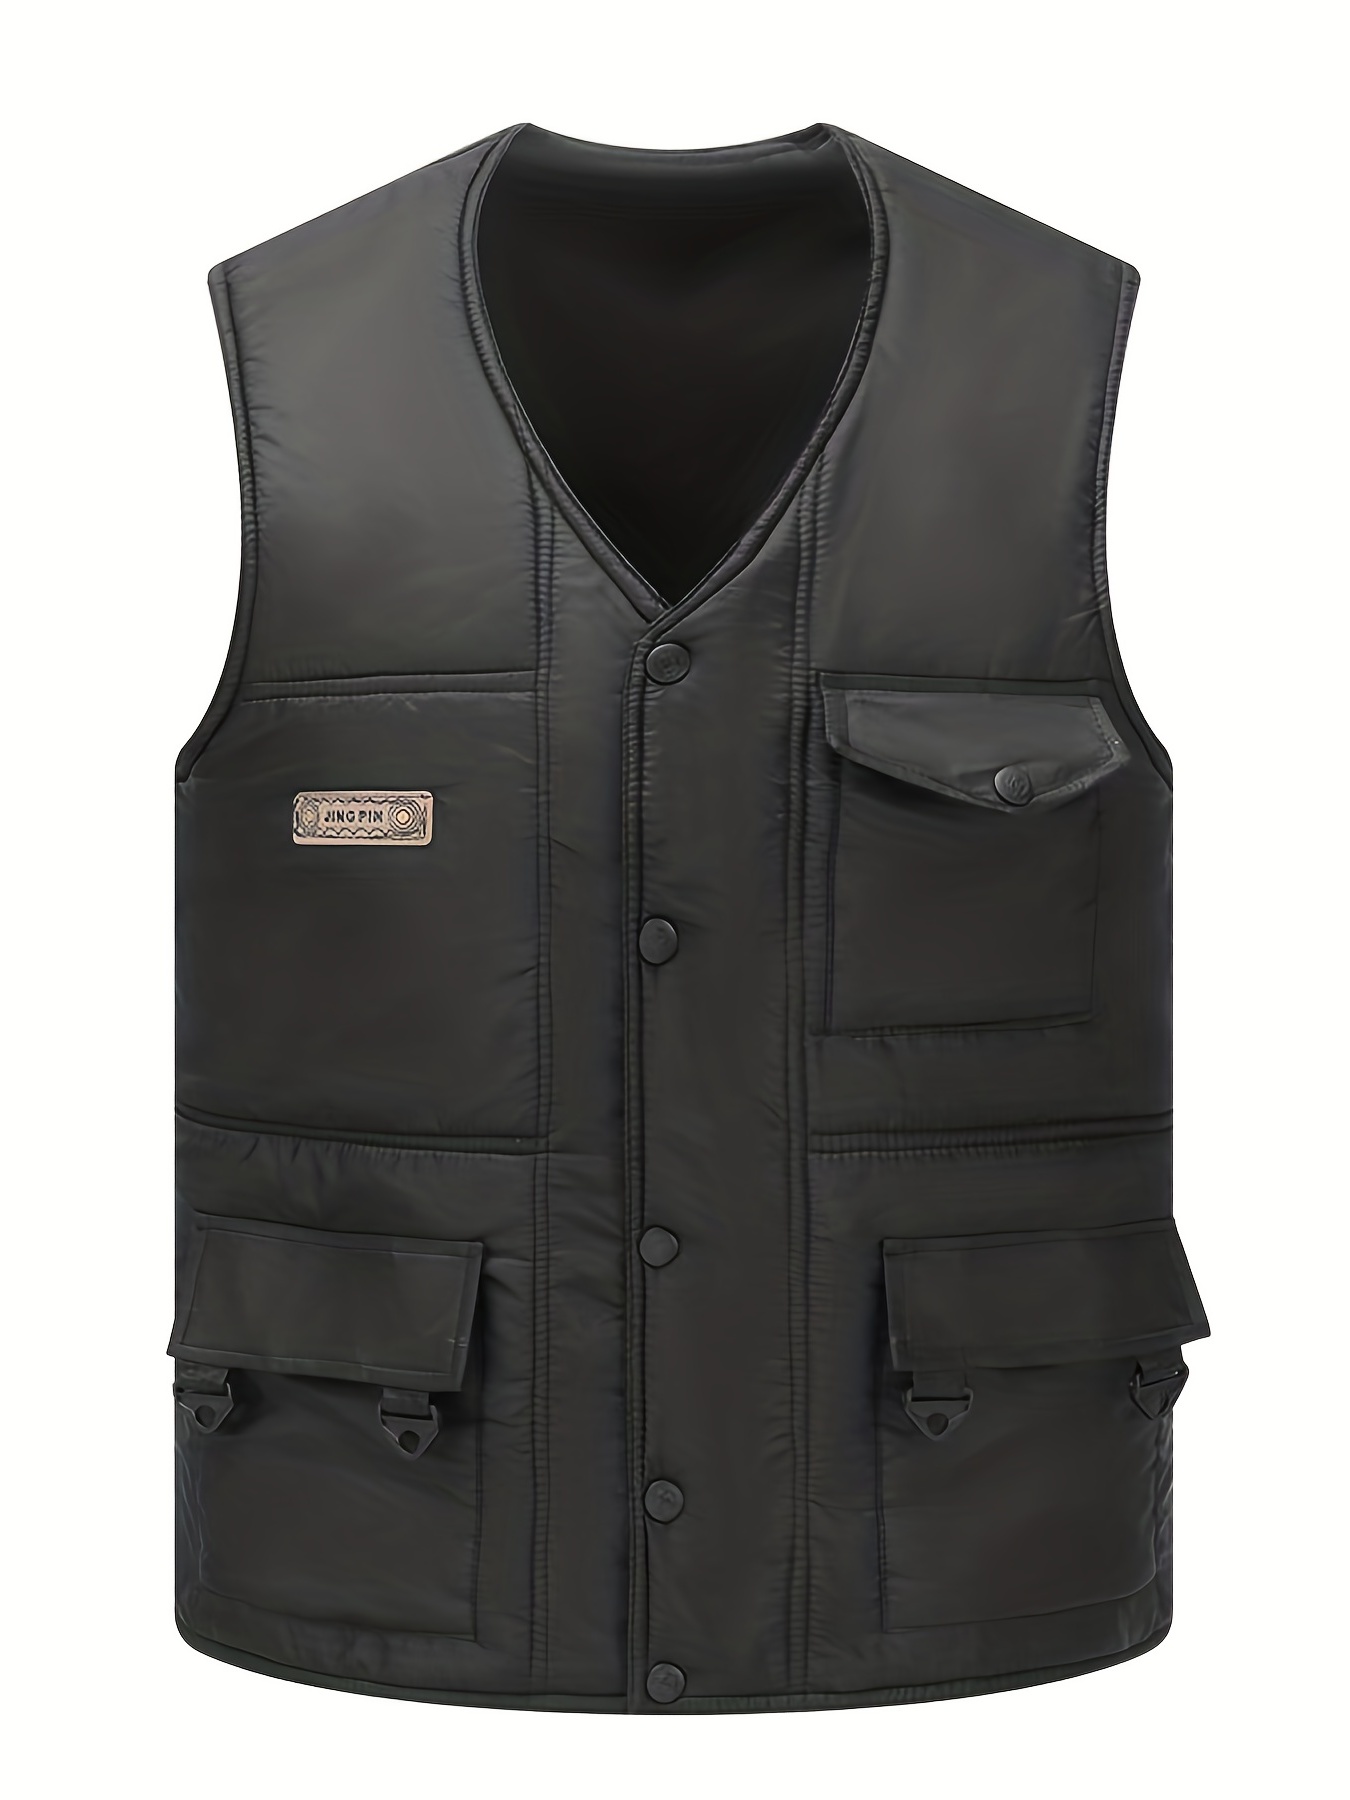 Wyongtao Hunting Vests for Men's Quick-drying Work Fishing Vests  Lightweight Travel Waistcoat with Multi-Pockets,Khaki XXL 